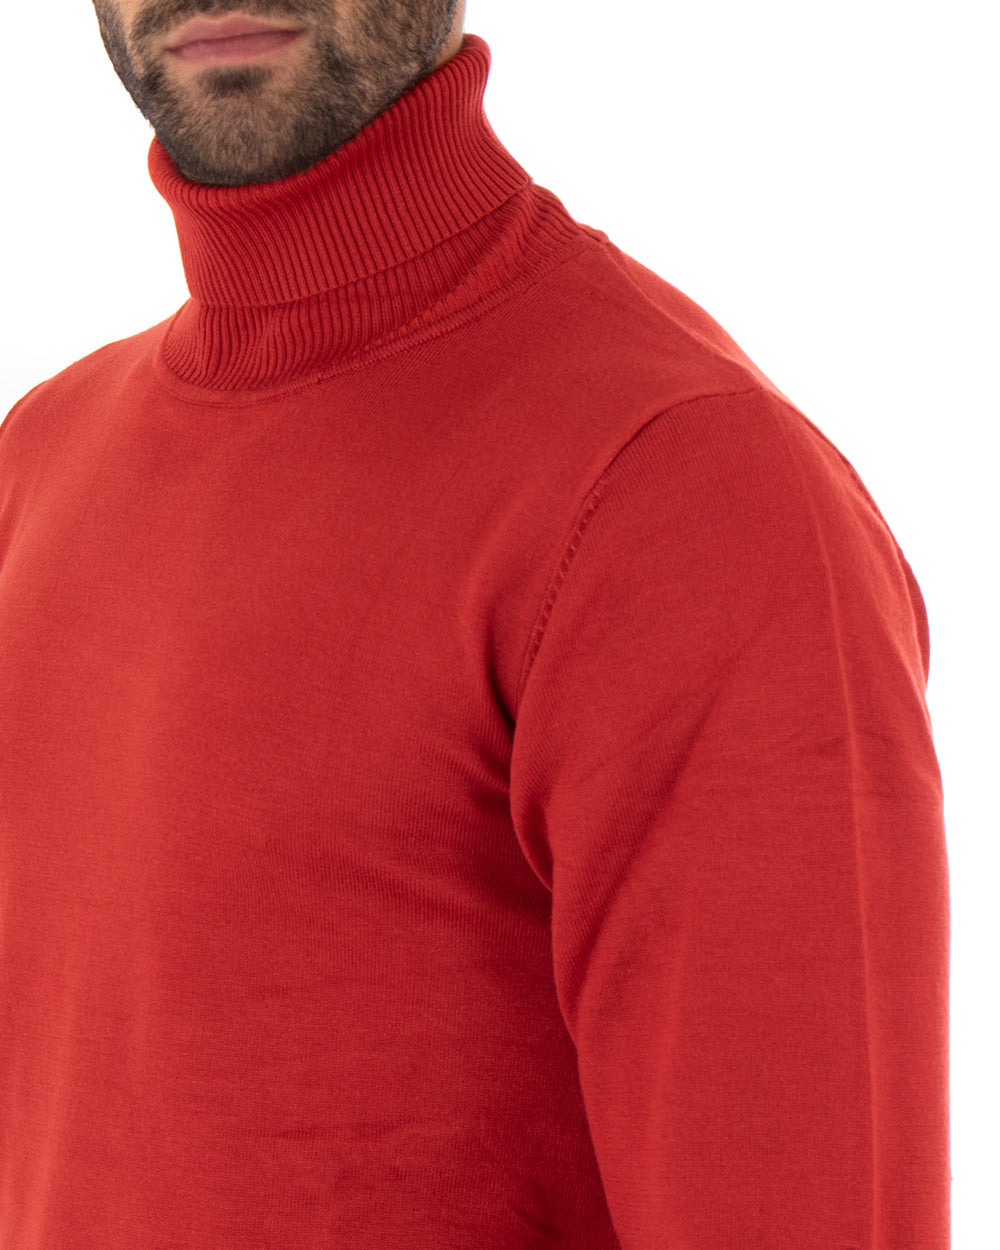 Men's Sweater Long Sleeves Elastic High Neck Solid Color Brick GIOSAL M2541A